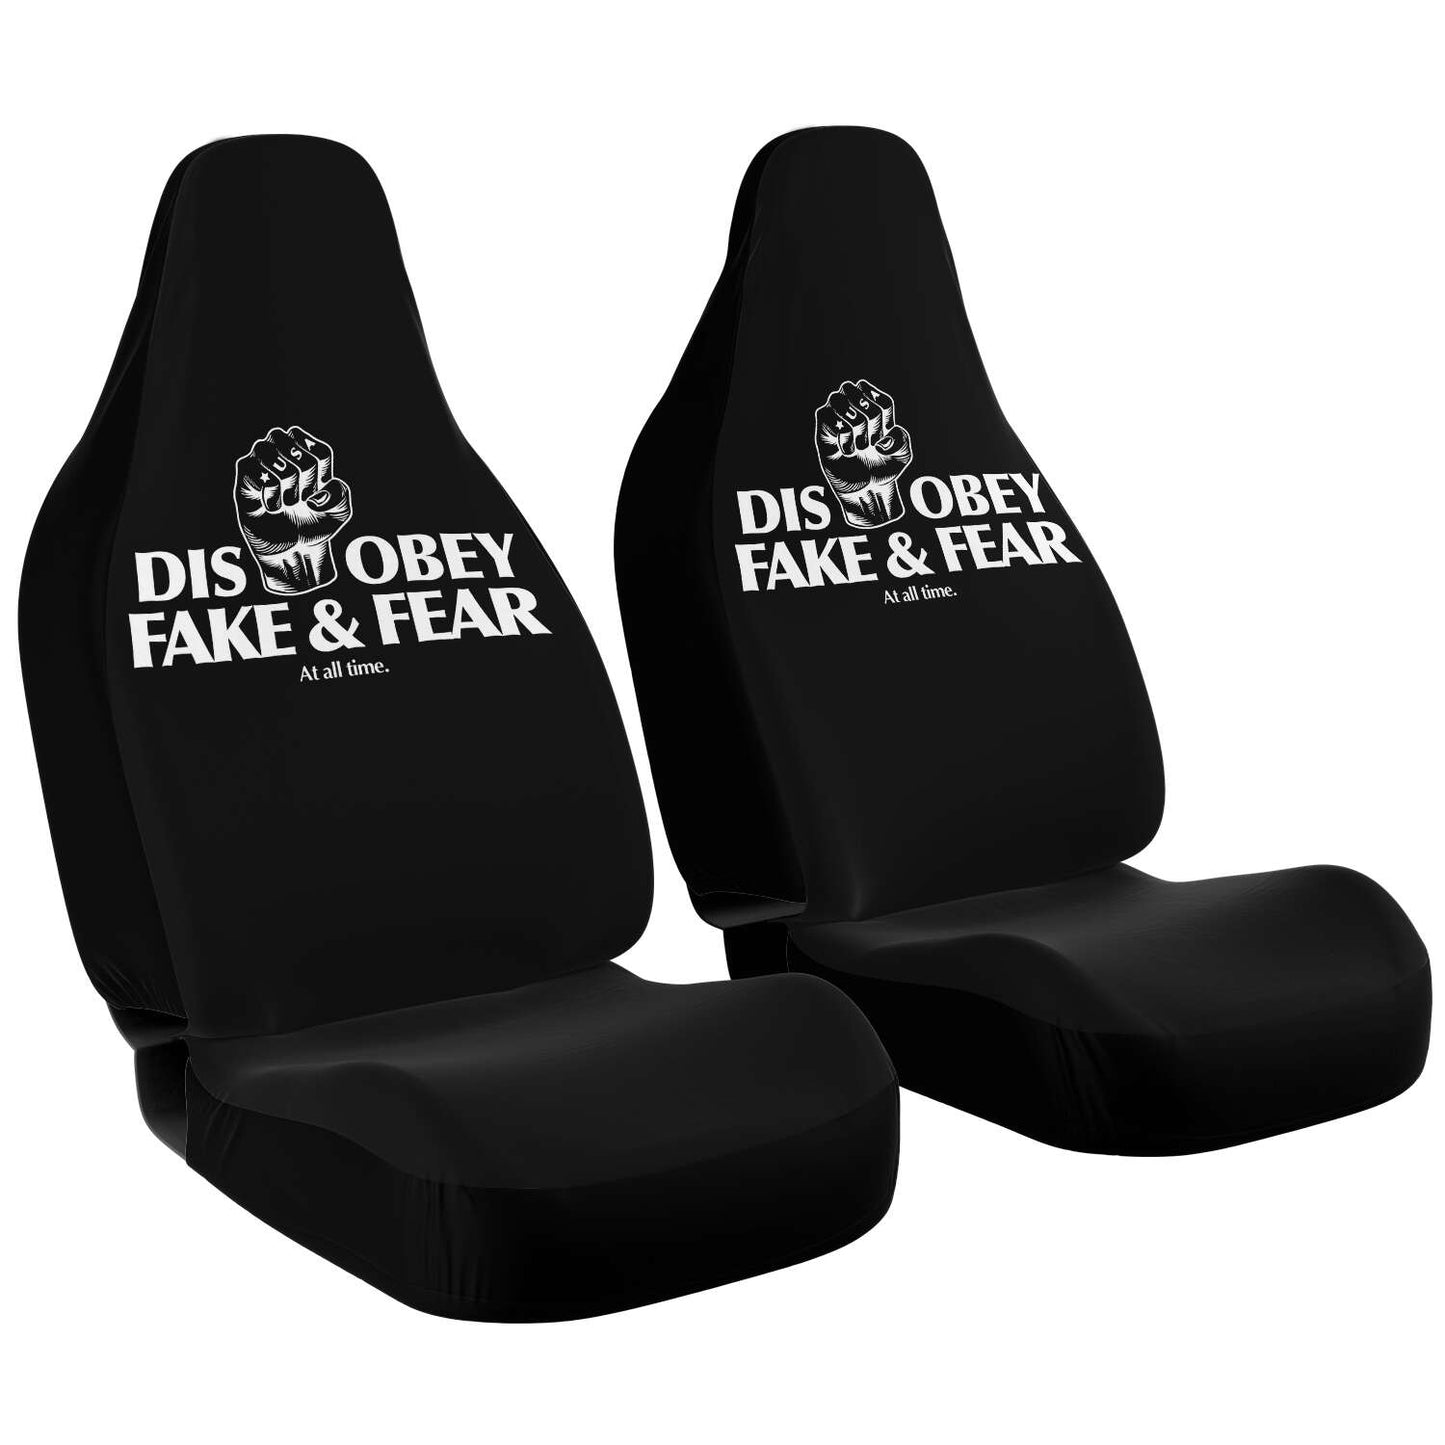 Disobey ✊🏻 Fake <br> & Fear At All Time <br> Seat Covers Black